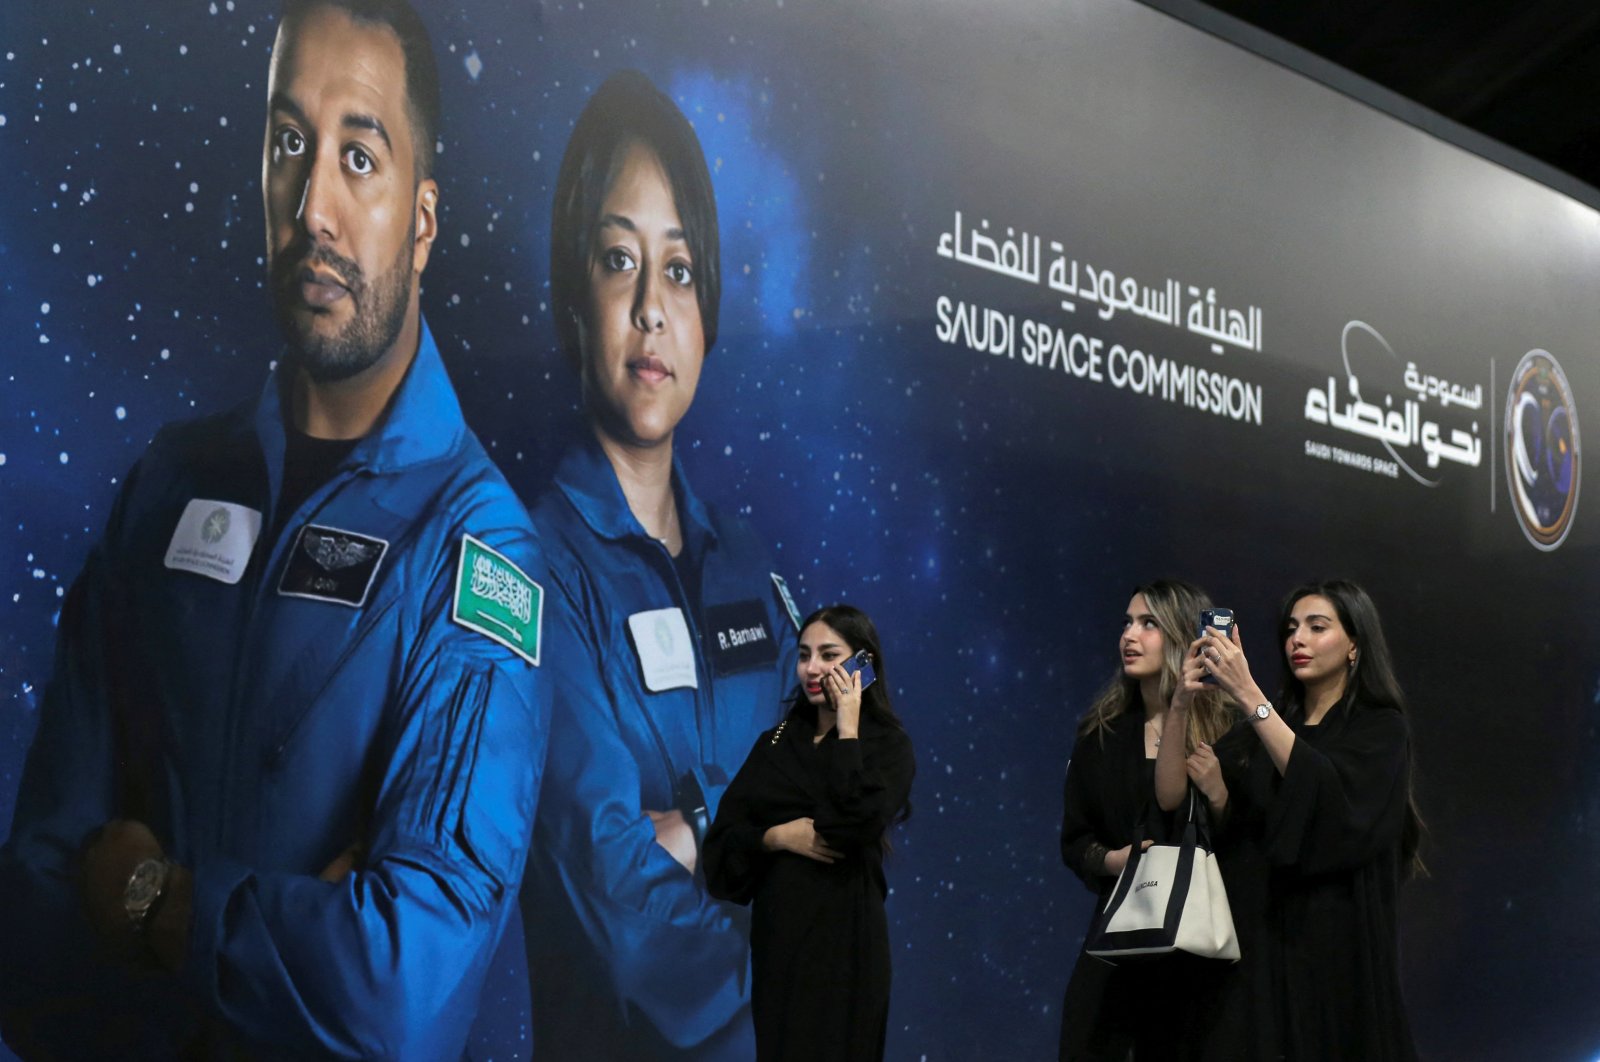 Saudi women arrive to watch the launch of a SpaceX Falcon 9 and Dragon capsule, part of the Axiom Mission 2 (Ax-2), carrying four astronauts, two of whom are Saudi nationals, in an event organized to celebrate the first Saudi woman into Space in Riyadh, Saudi Arabia, May 21, 2023. (Reuters Photo)